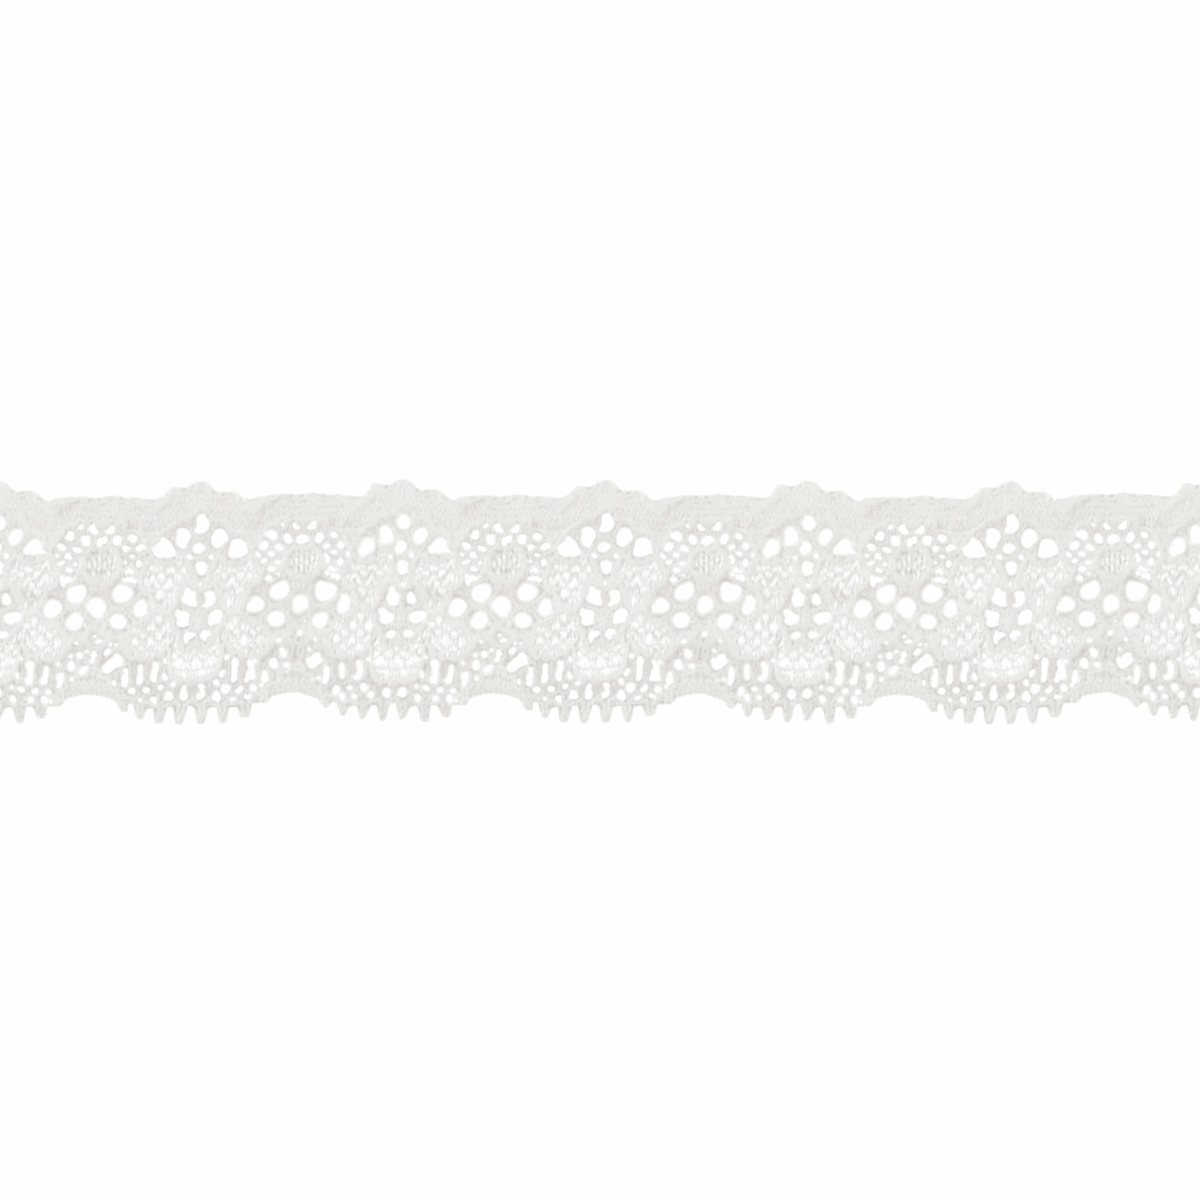 STYLE 055 // STRETCH LACE OVERLAY – THE OWN STUDIO